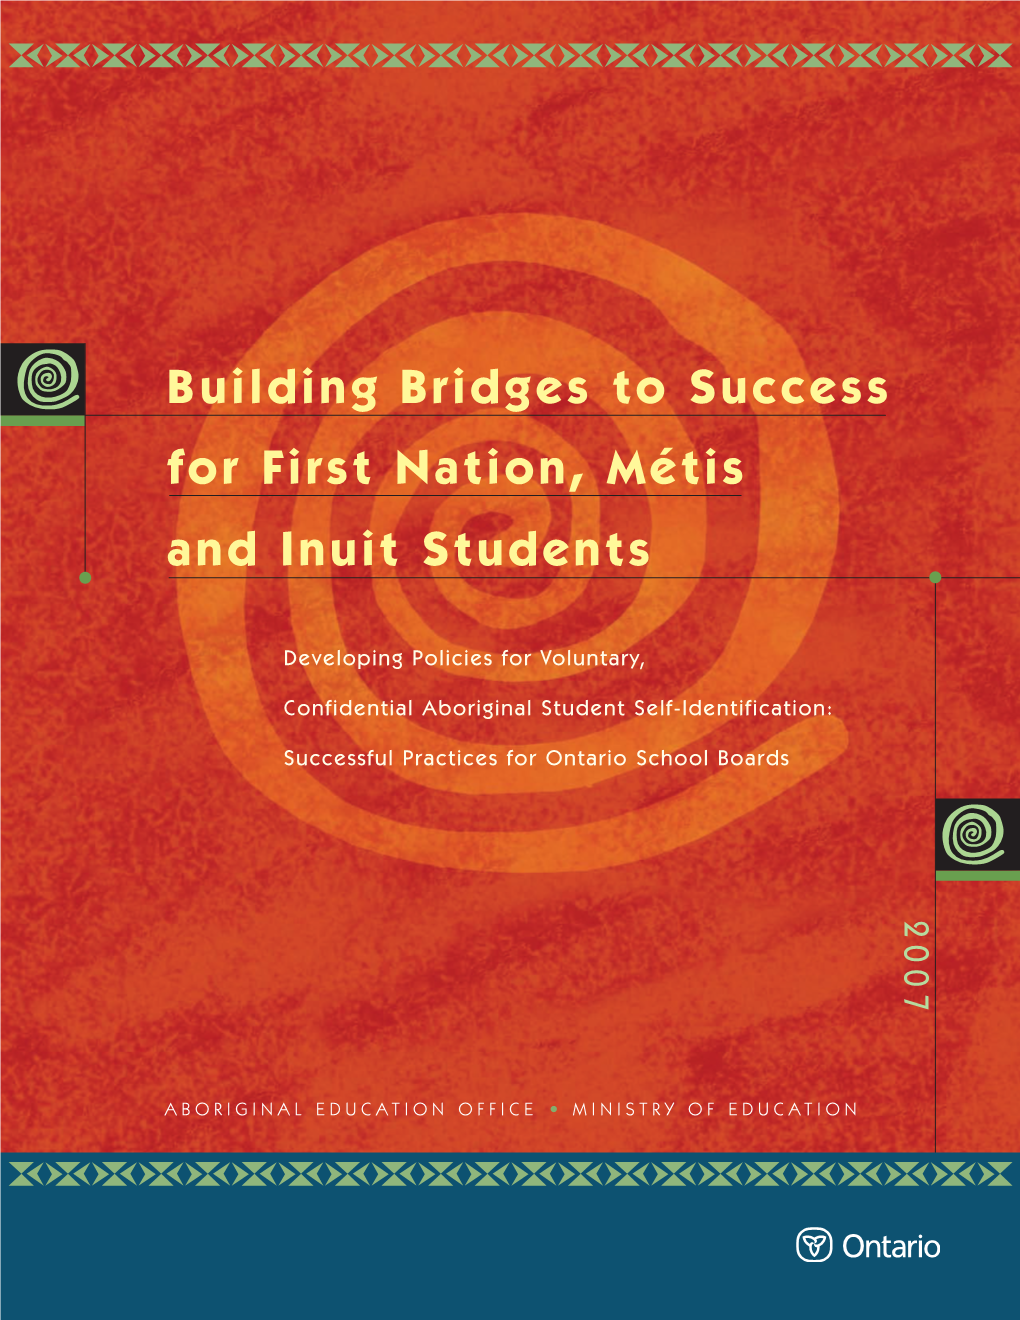 Building Bridges to Success for First Nation, Métis and Inuit Students